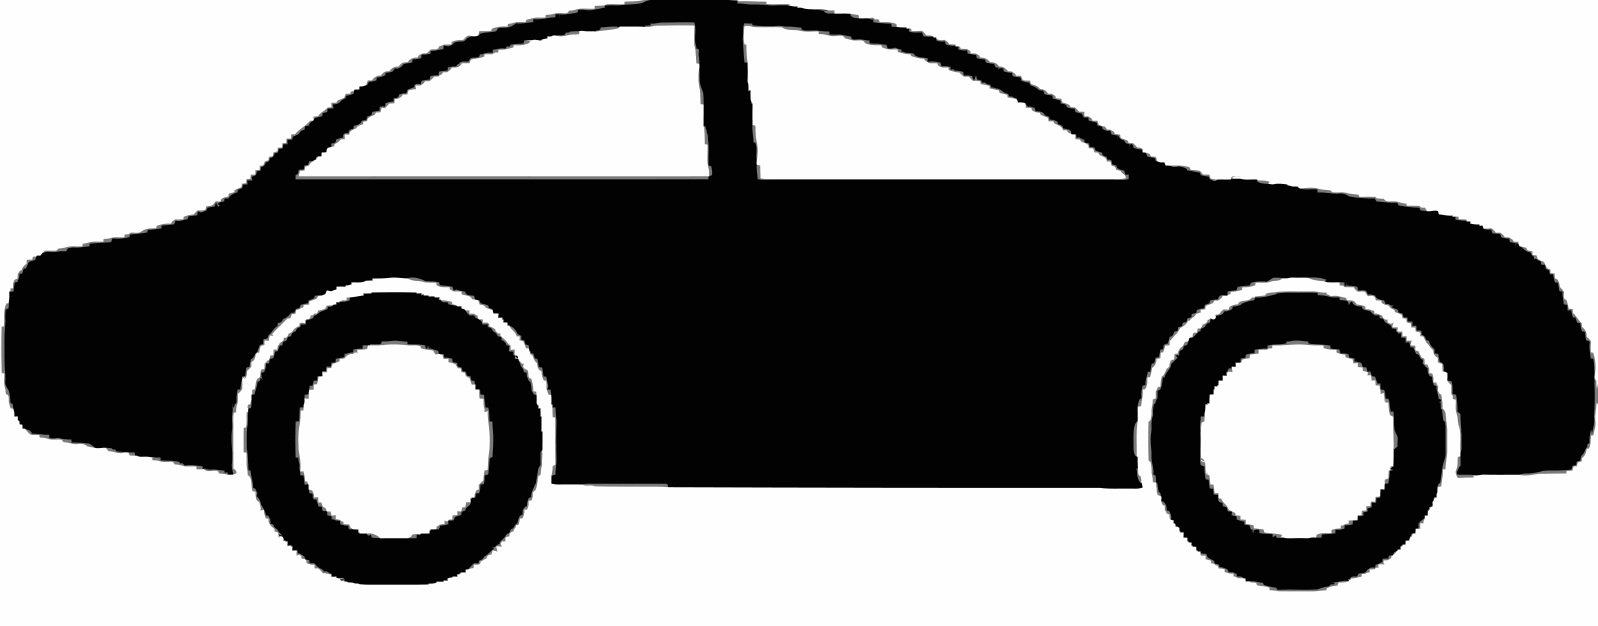 Image of car clipart 1 free t